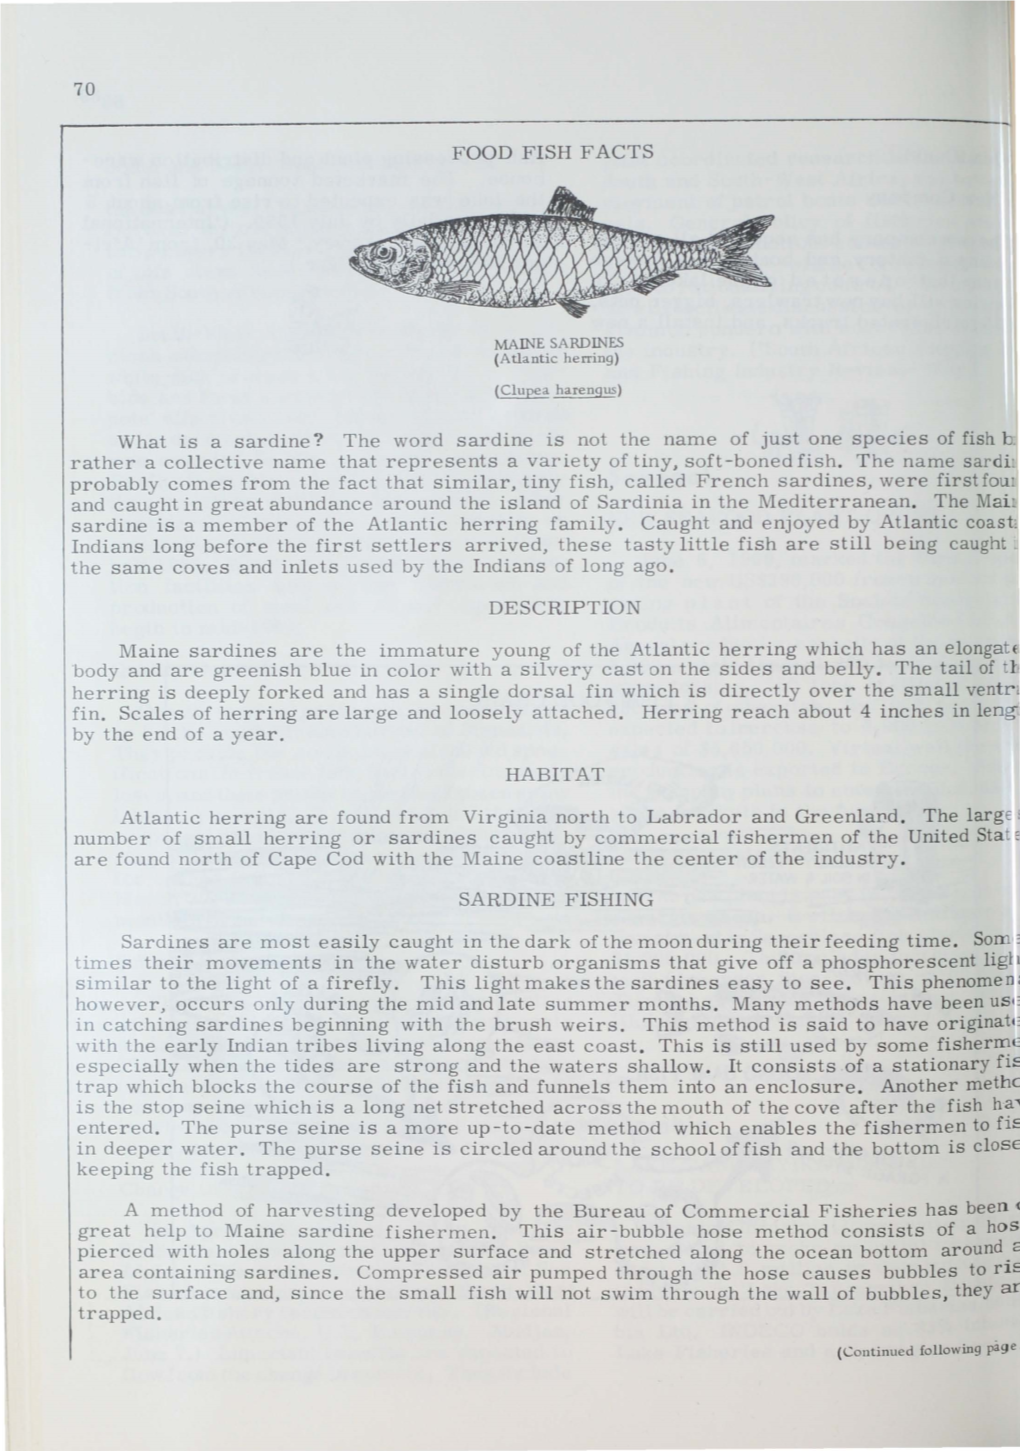 FOOD FISH FACTS What Is a Sardine?